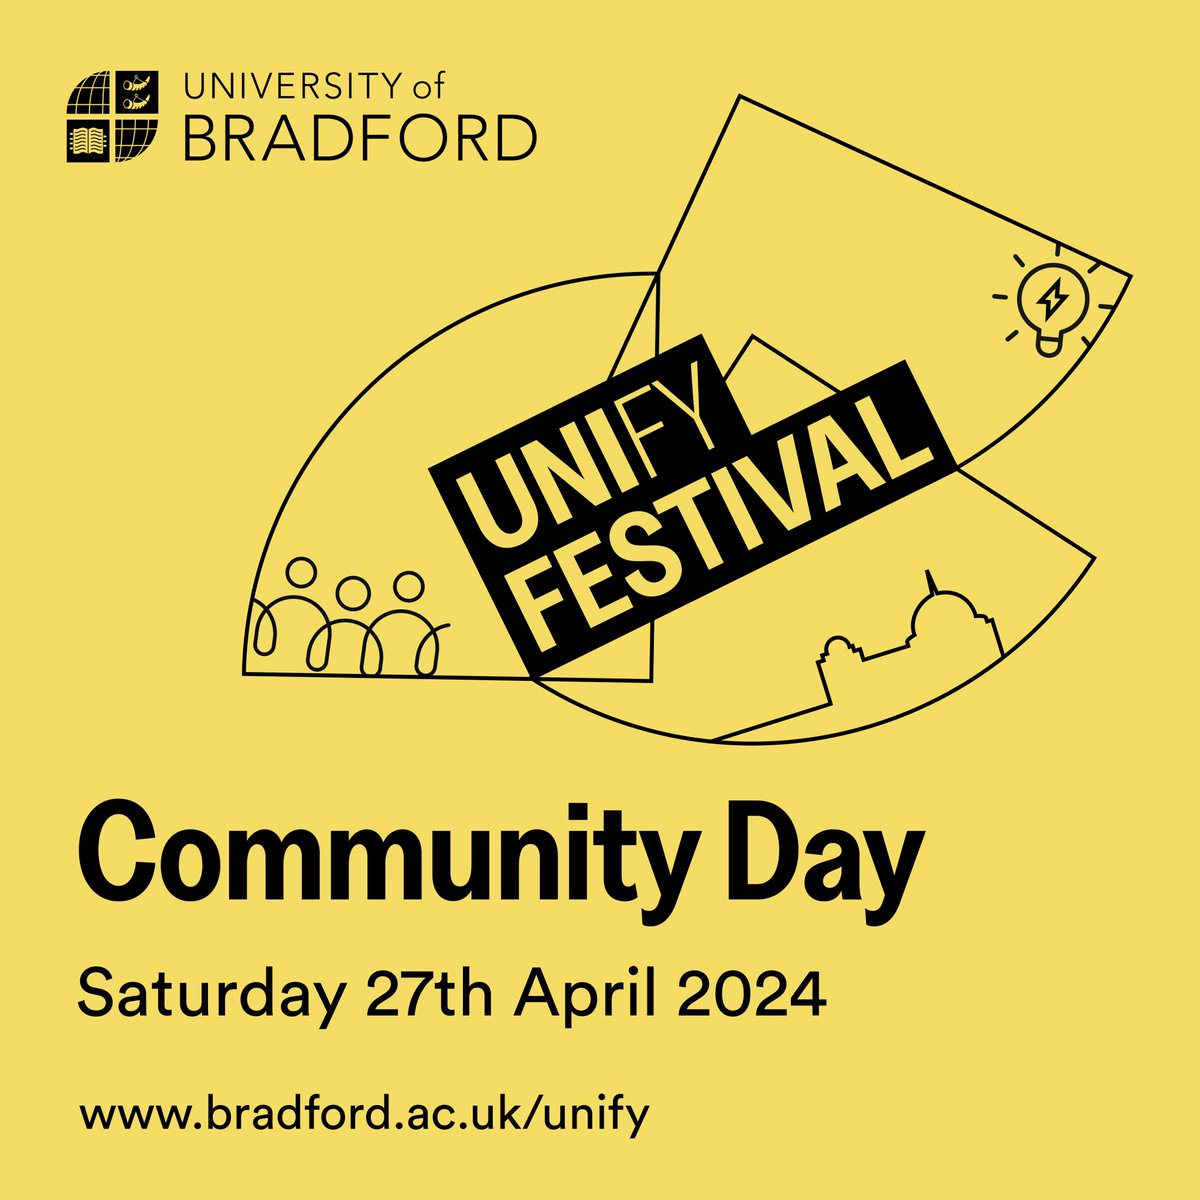 Have you ever… 🦸‍♀️created your own superhero; 🛰️tested a space satellite; 🐉entered the Dragon's den? Join us @uniofbradford FREE UNIfy Festival Community Day to try these & many more exciting activities! Register your interest 🔗 tinyurl.com/4vaz7a92